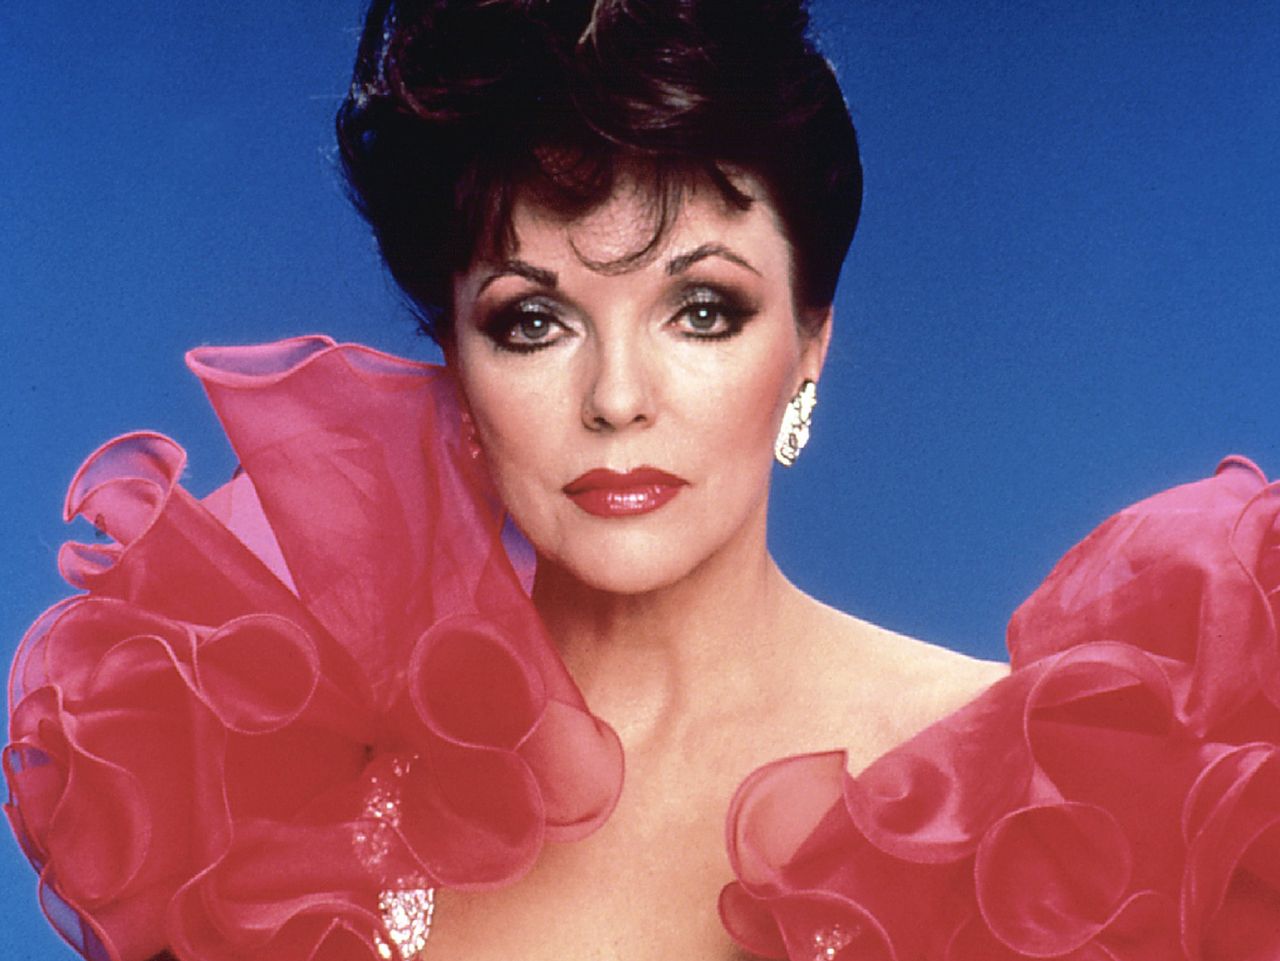 Joan Collins played, among others, the character Alexis in "Dynasty"